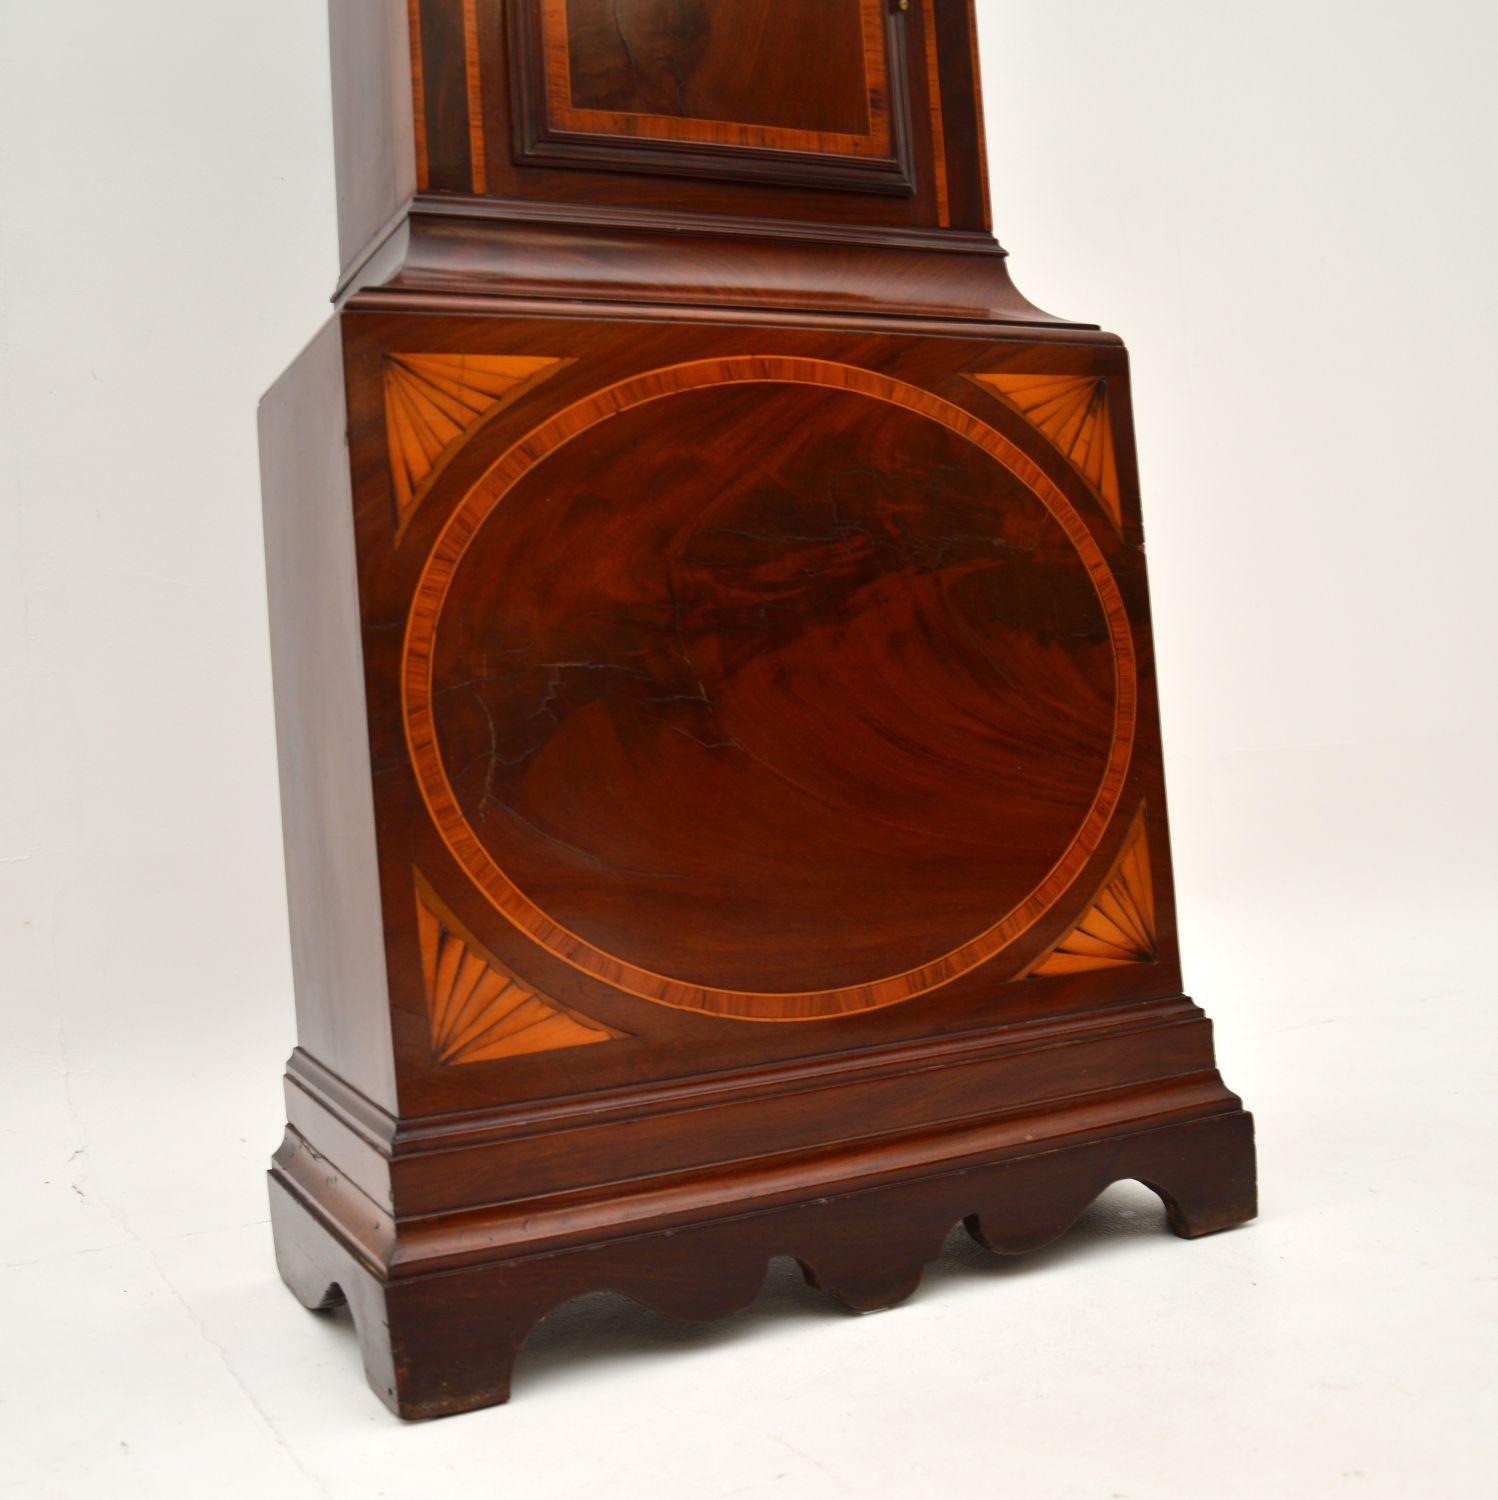 Antique Georgian Period Long Case Clock by Richard Reeves 1